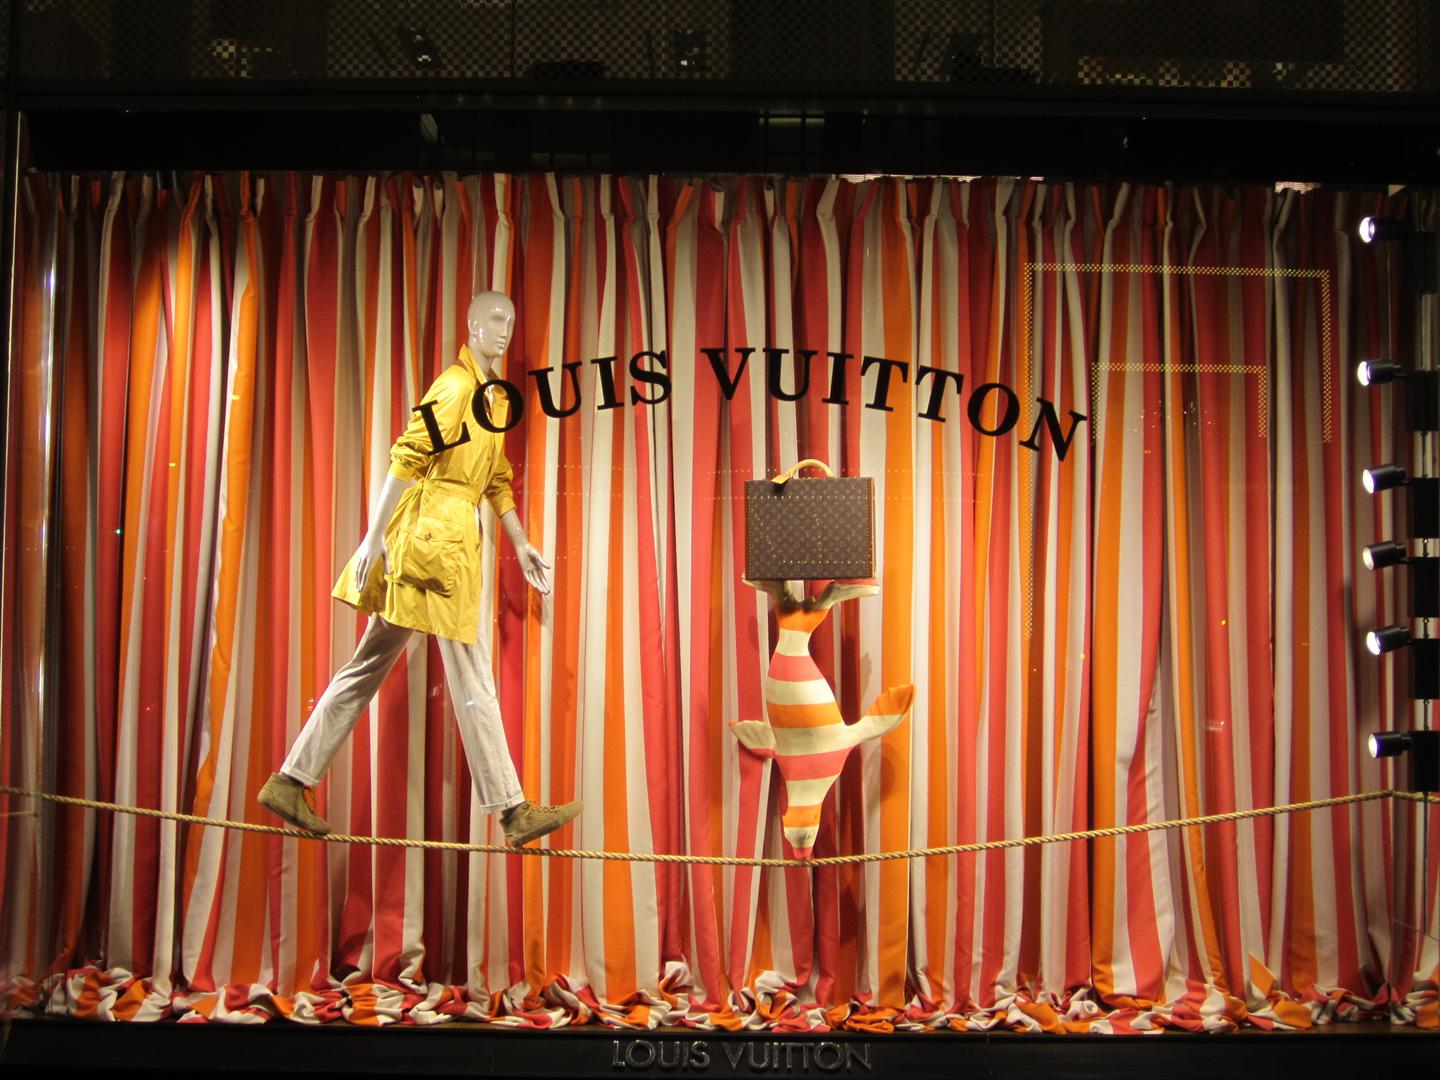 Christmas in NYC (Louis Vuitton)